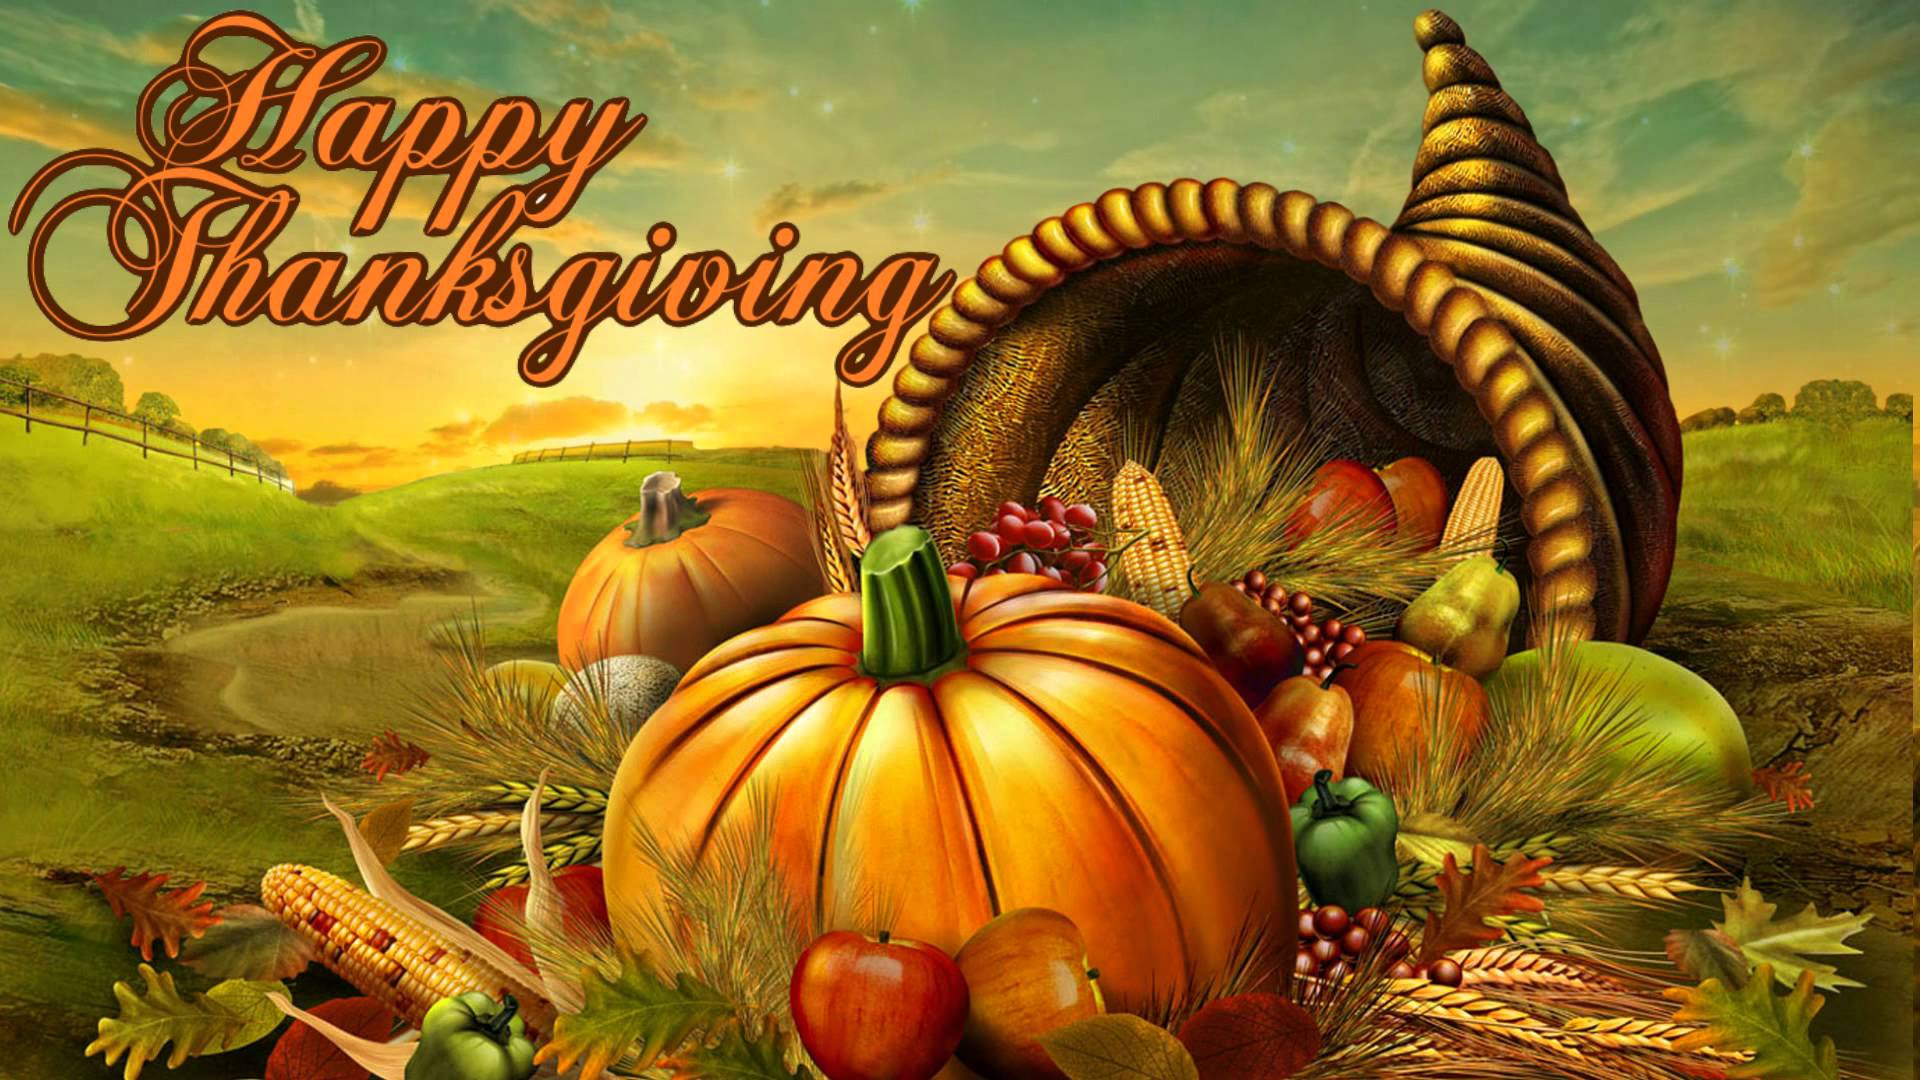 Thanksgiving - Free Creative Commons background video 1080p HD ...